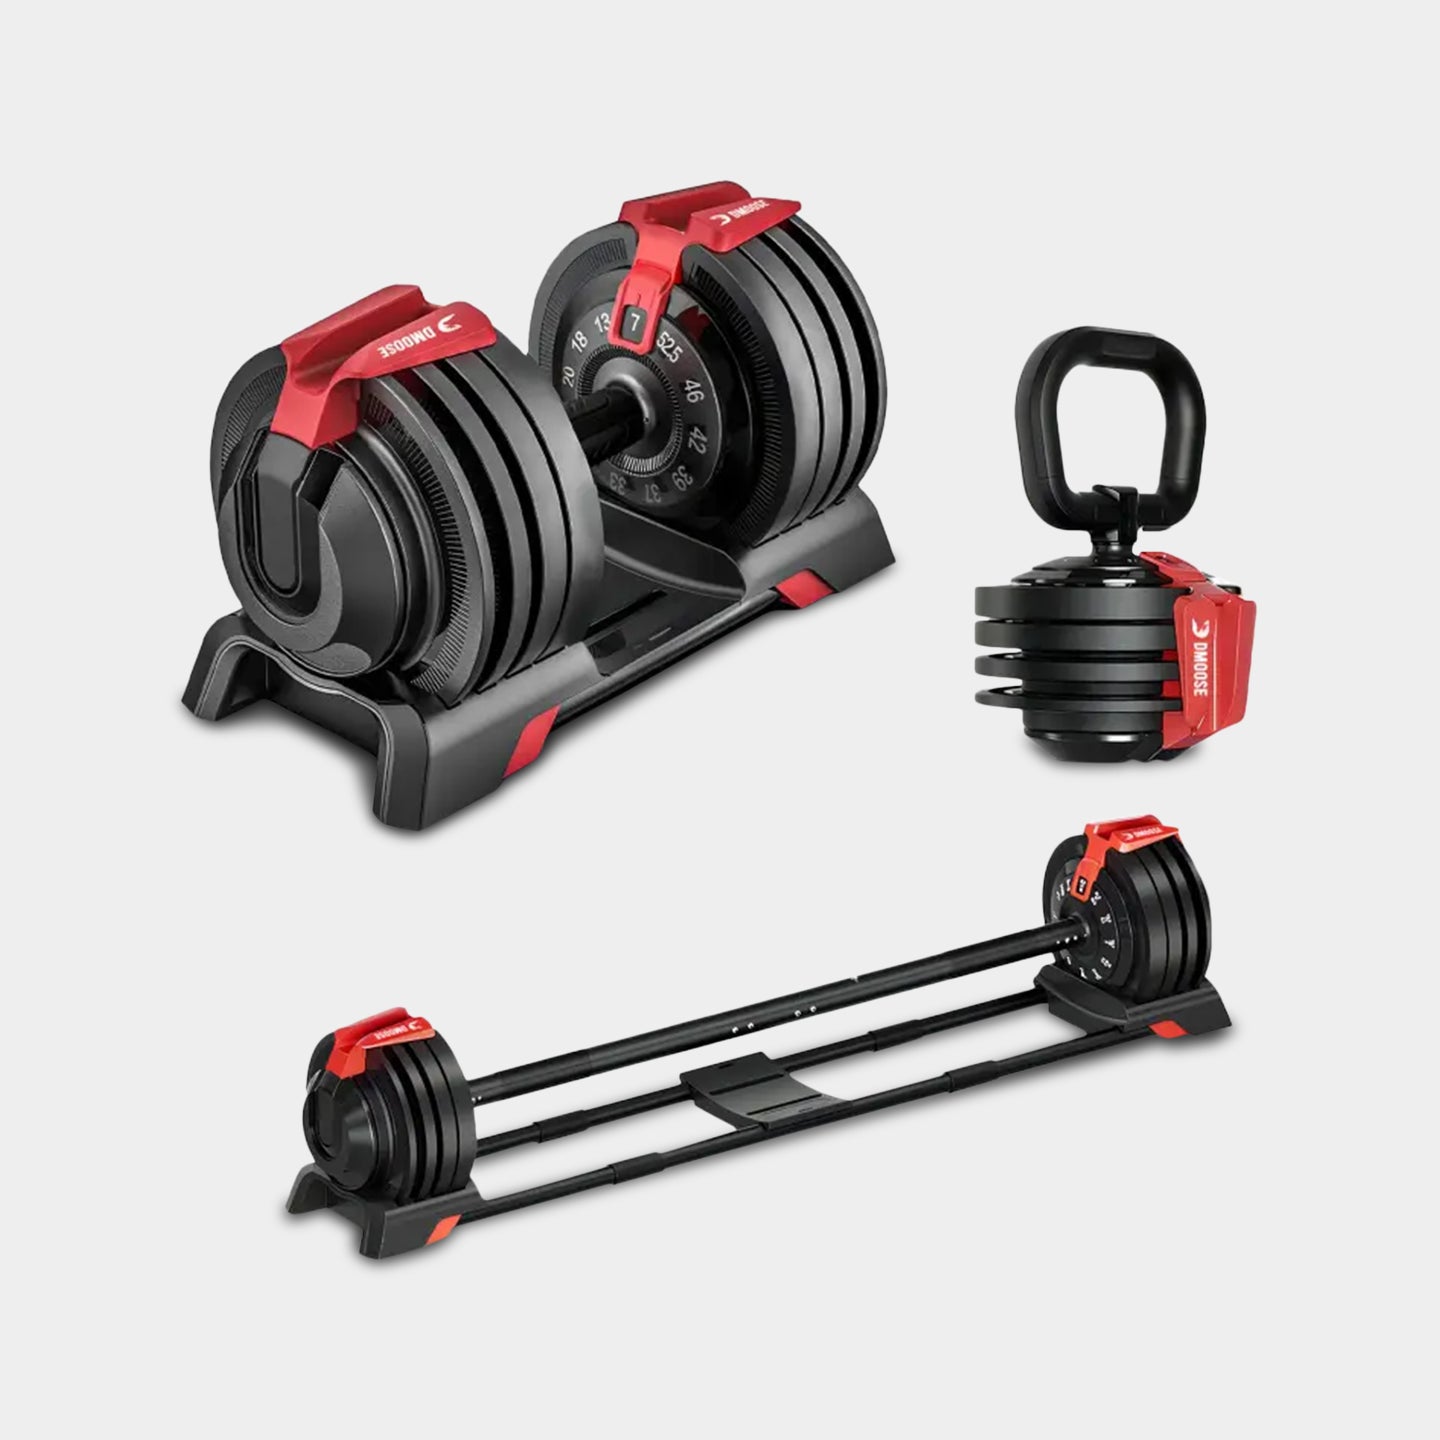 DMOOSE 3-in-1 Adjustable Dumbbell, Barbell & Kettlebell 52 lbs Set A1